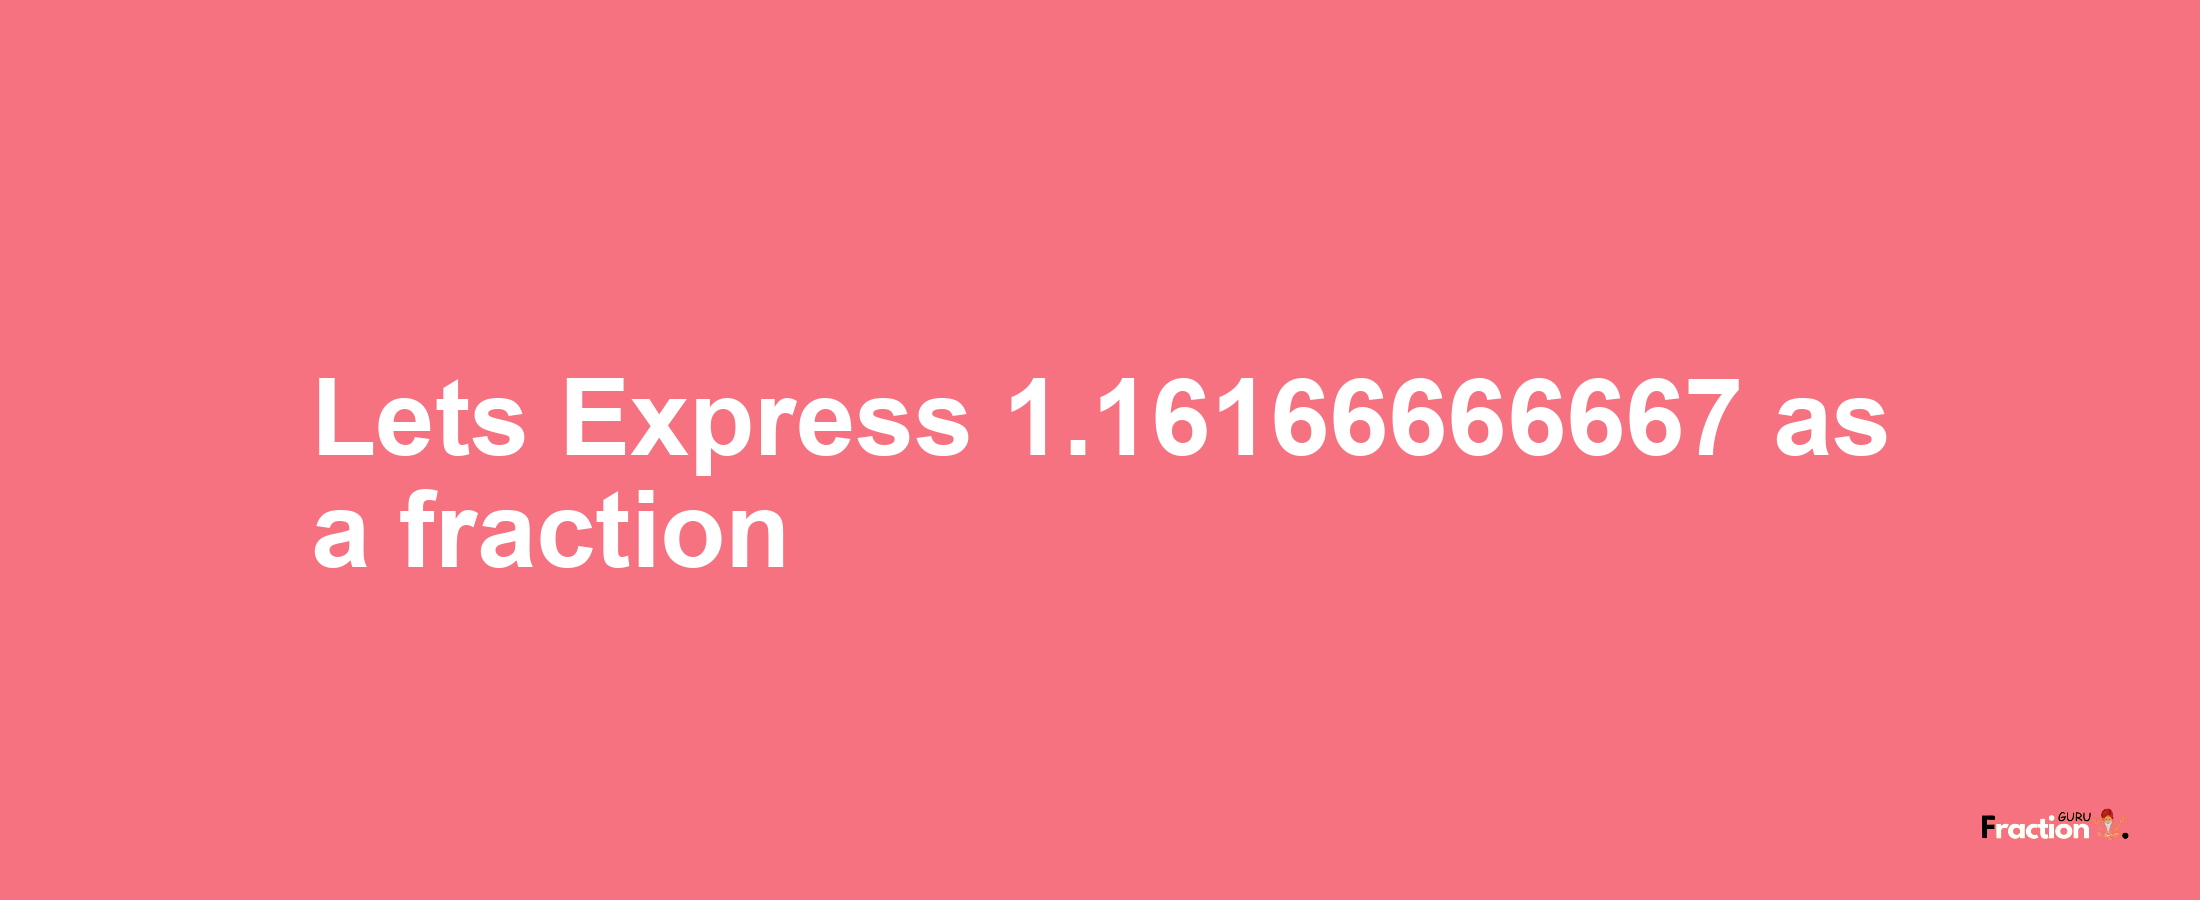 Lets Express 1.16166666667 as afraction